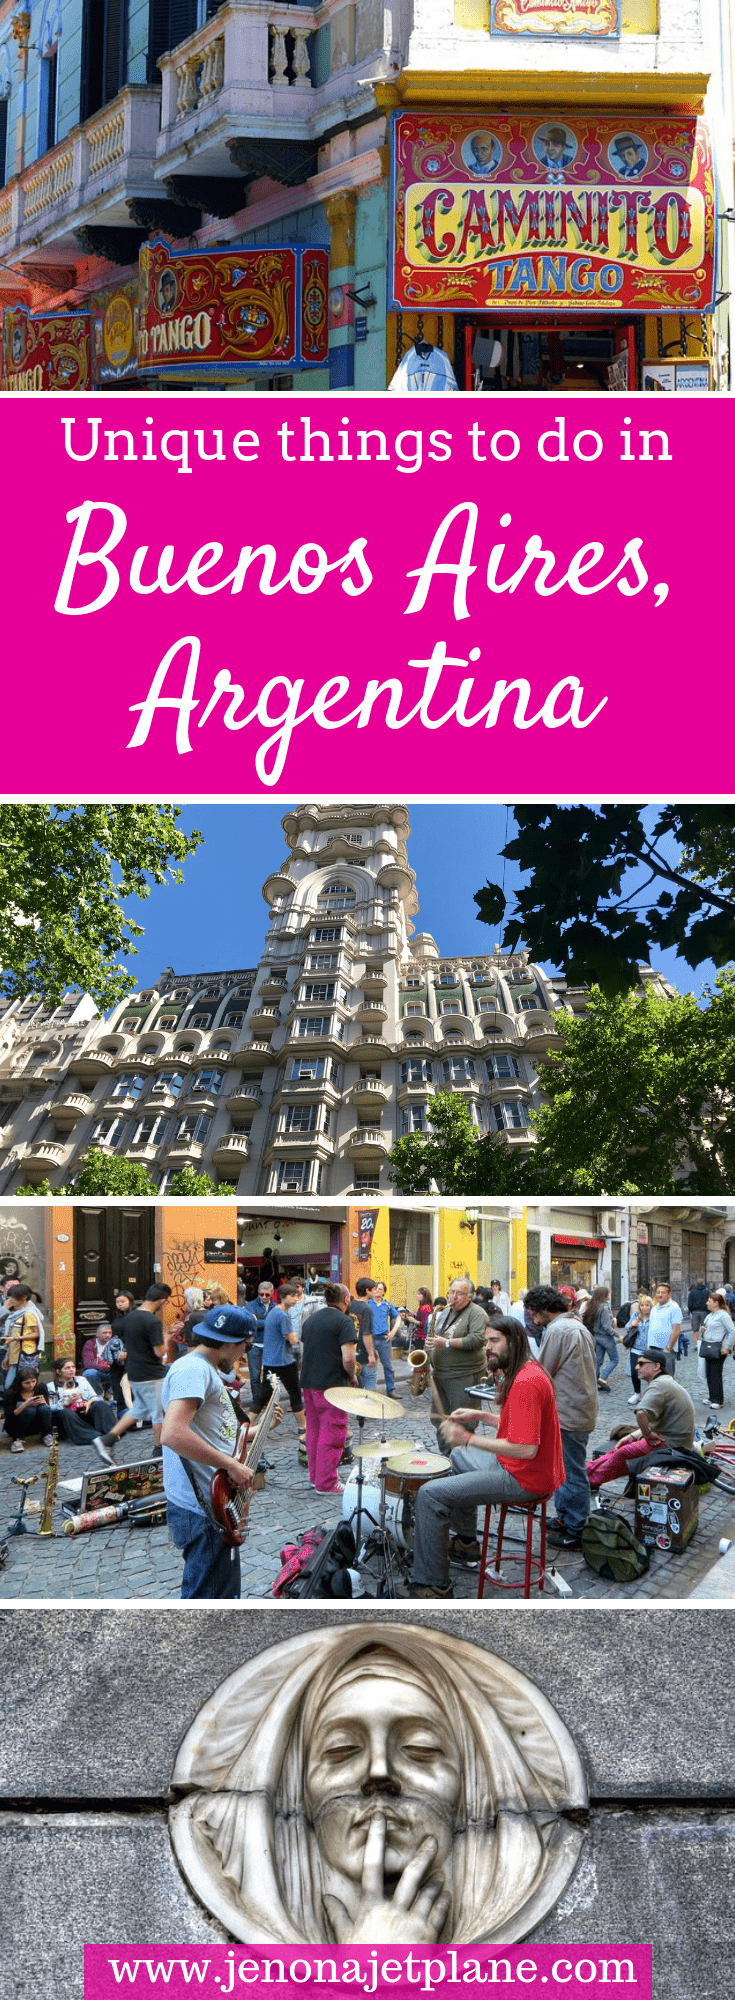 Looking for unique things to do in Buenos Aires, Argentina? From going on a parilla tour to visiting the grave of Eva Peron, these are 8 activities you won't want to miss. Save to your travel board for future reference. #argentinatravel #buenosairesargentina #buenosairestravel #buenosairesargentinathingstodo #buenosairesthingstodo #travelsouthamerica